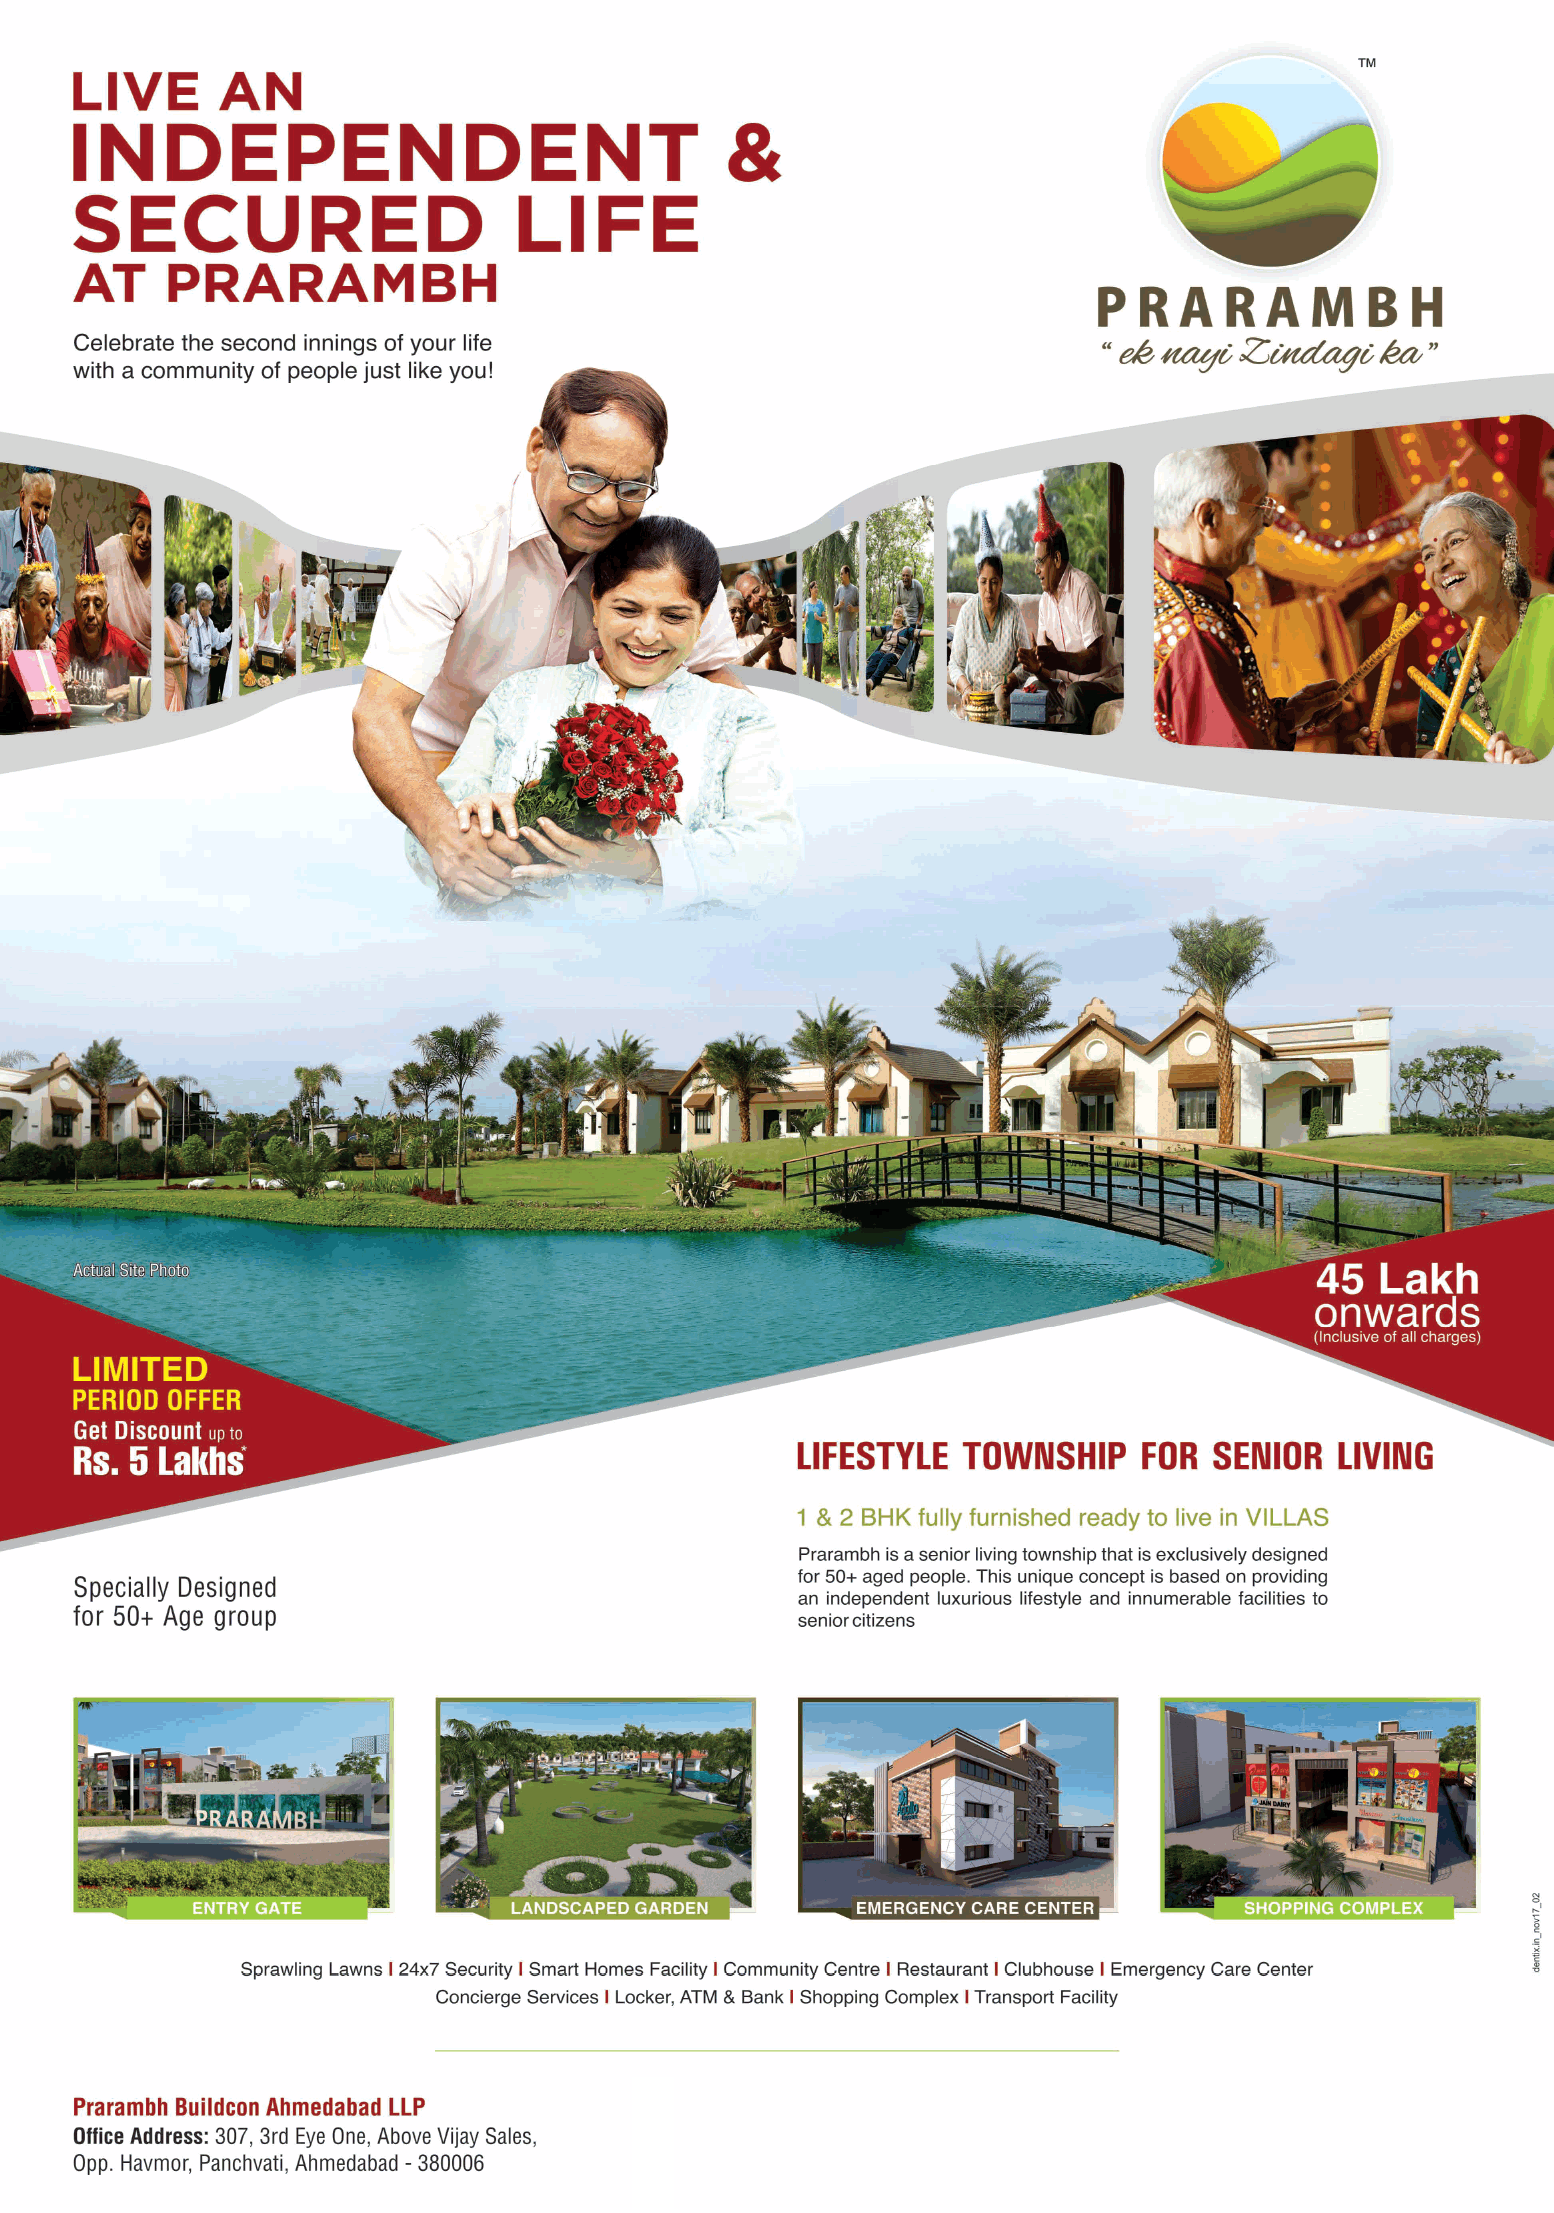 Live an independent and secured life at Prarambh in Ahmedabad